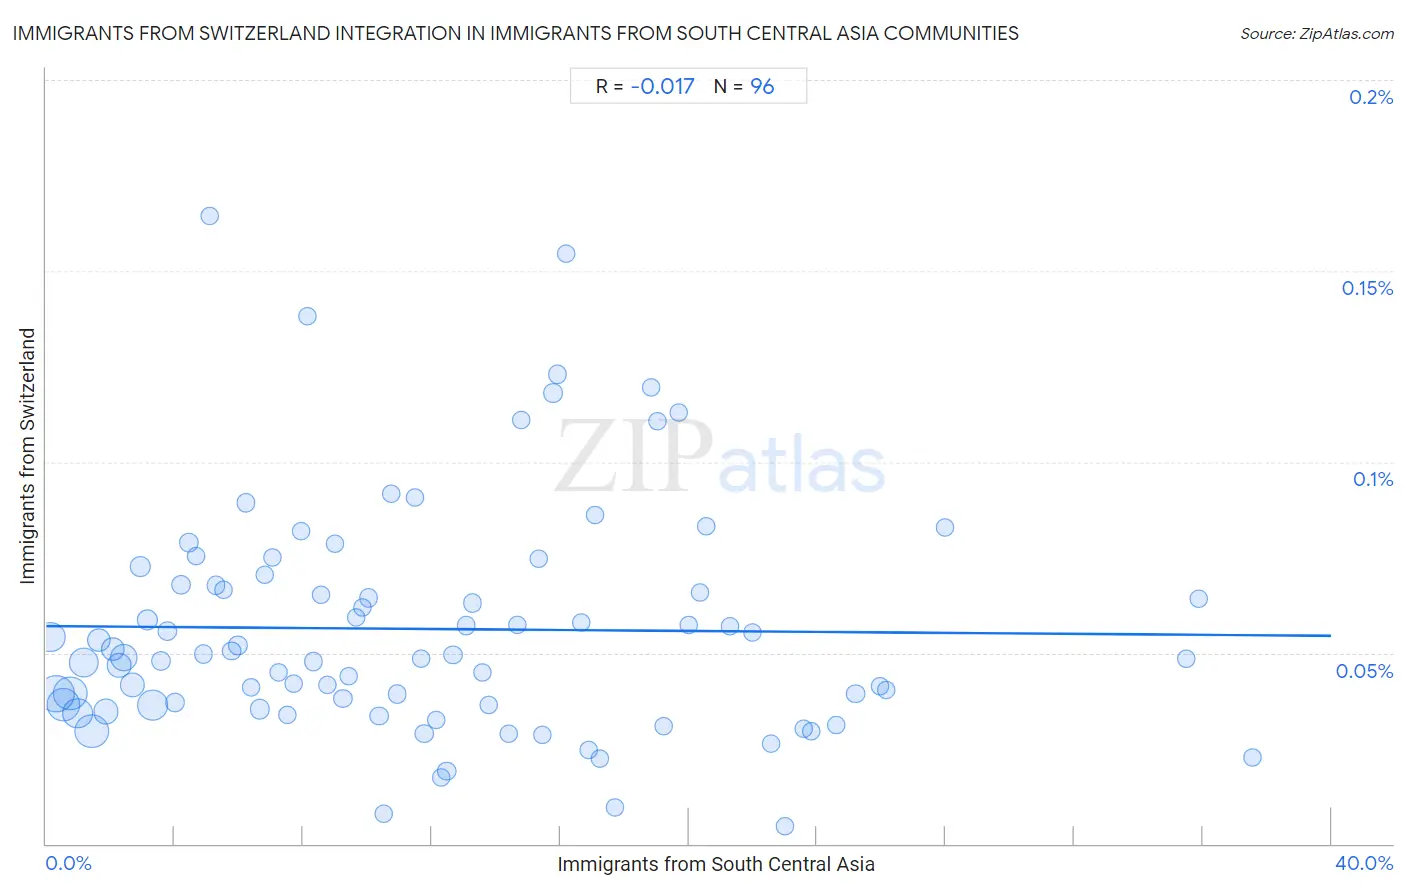 Immigrants from South Central Asia Integration in Immigrants from Switzerland Communities